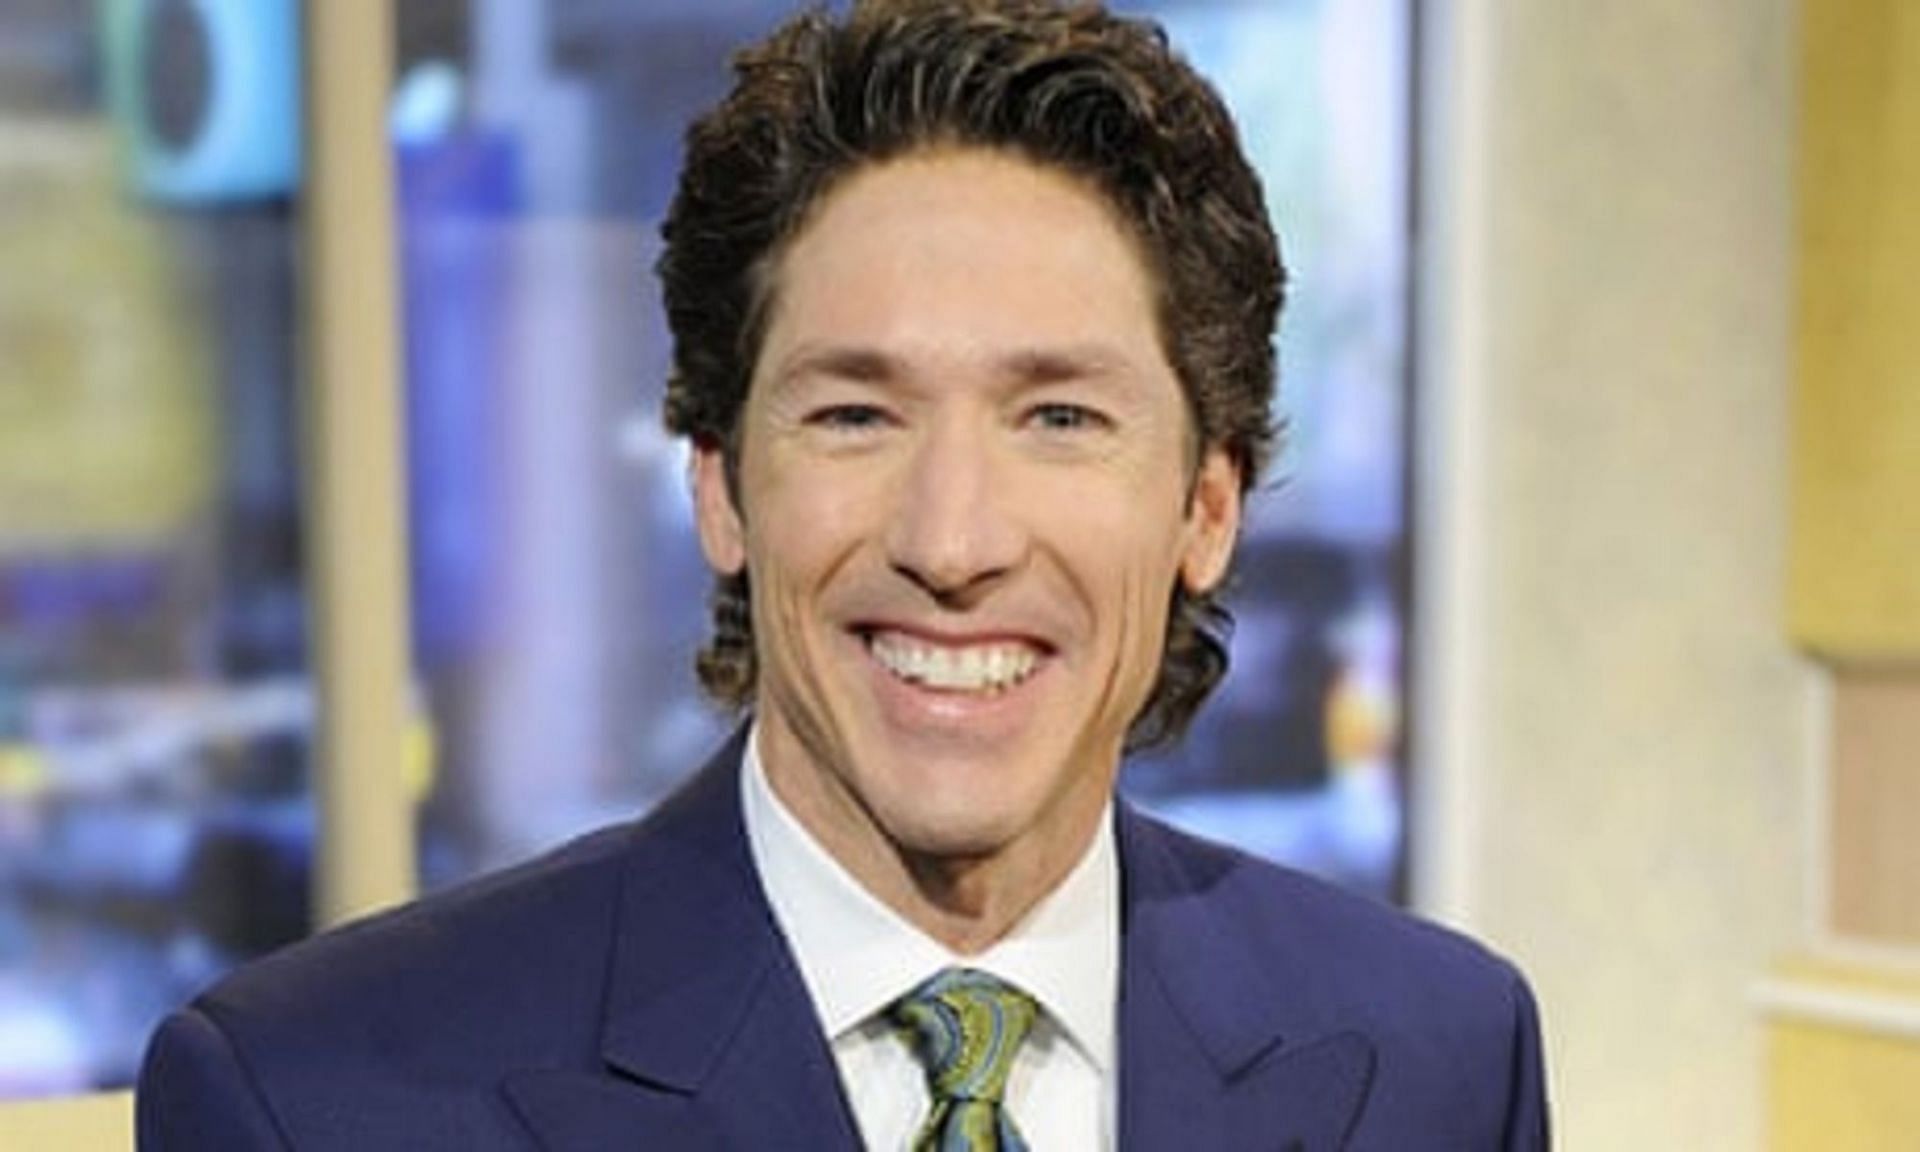 Joel Osteen receives backlash for his luxurious lifestyle (Image via ABC)